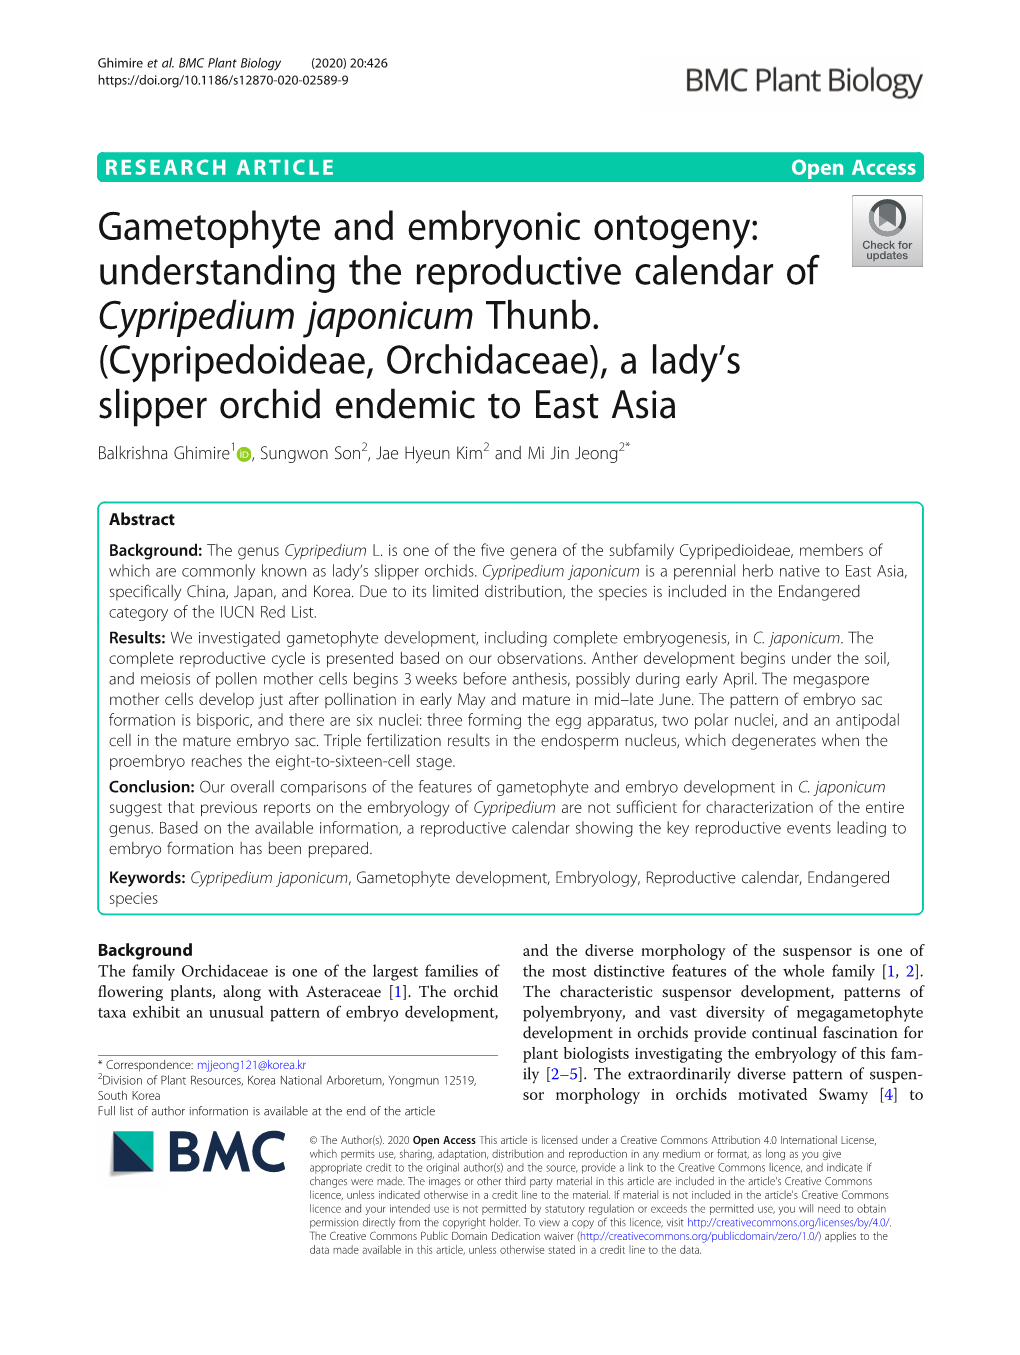 Gametophyte and Embryonic Ontogeny: Understanding the Reproductive Calendar of Cypripedium Japonicum Thunb